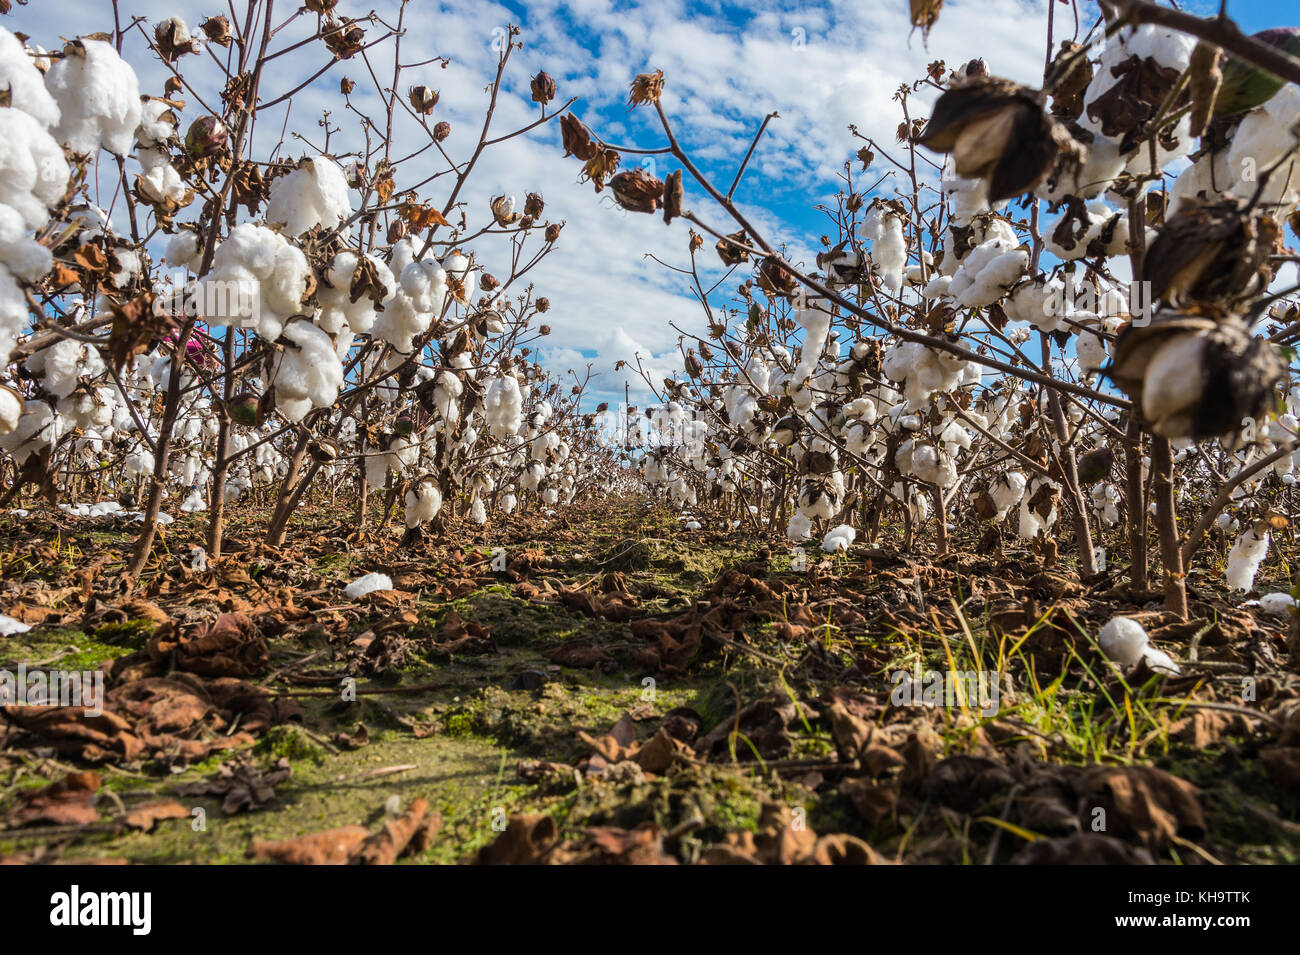 Cotton field at harvest time Stock Photo